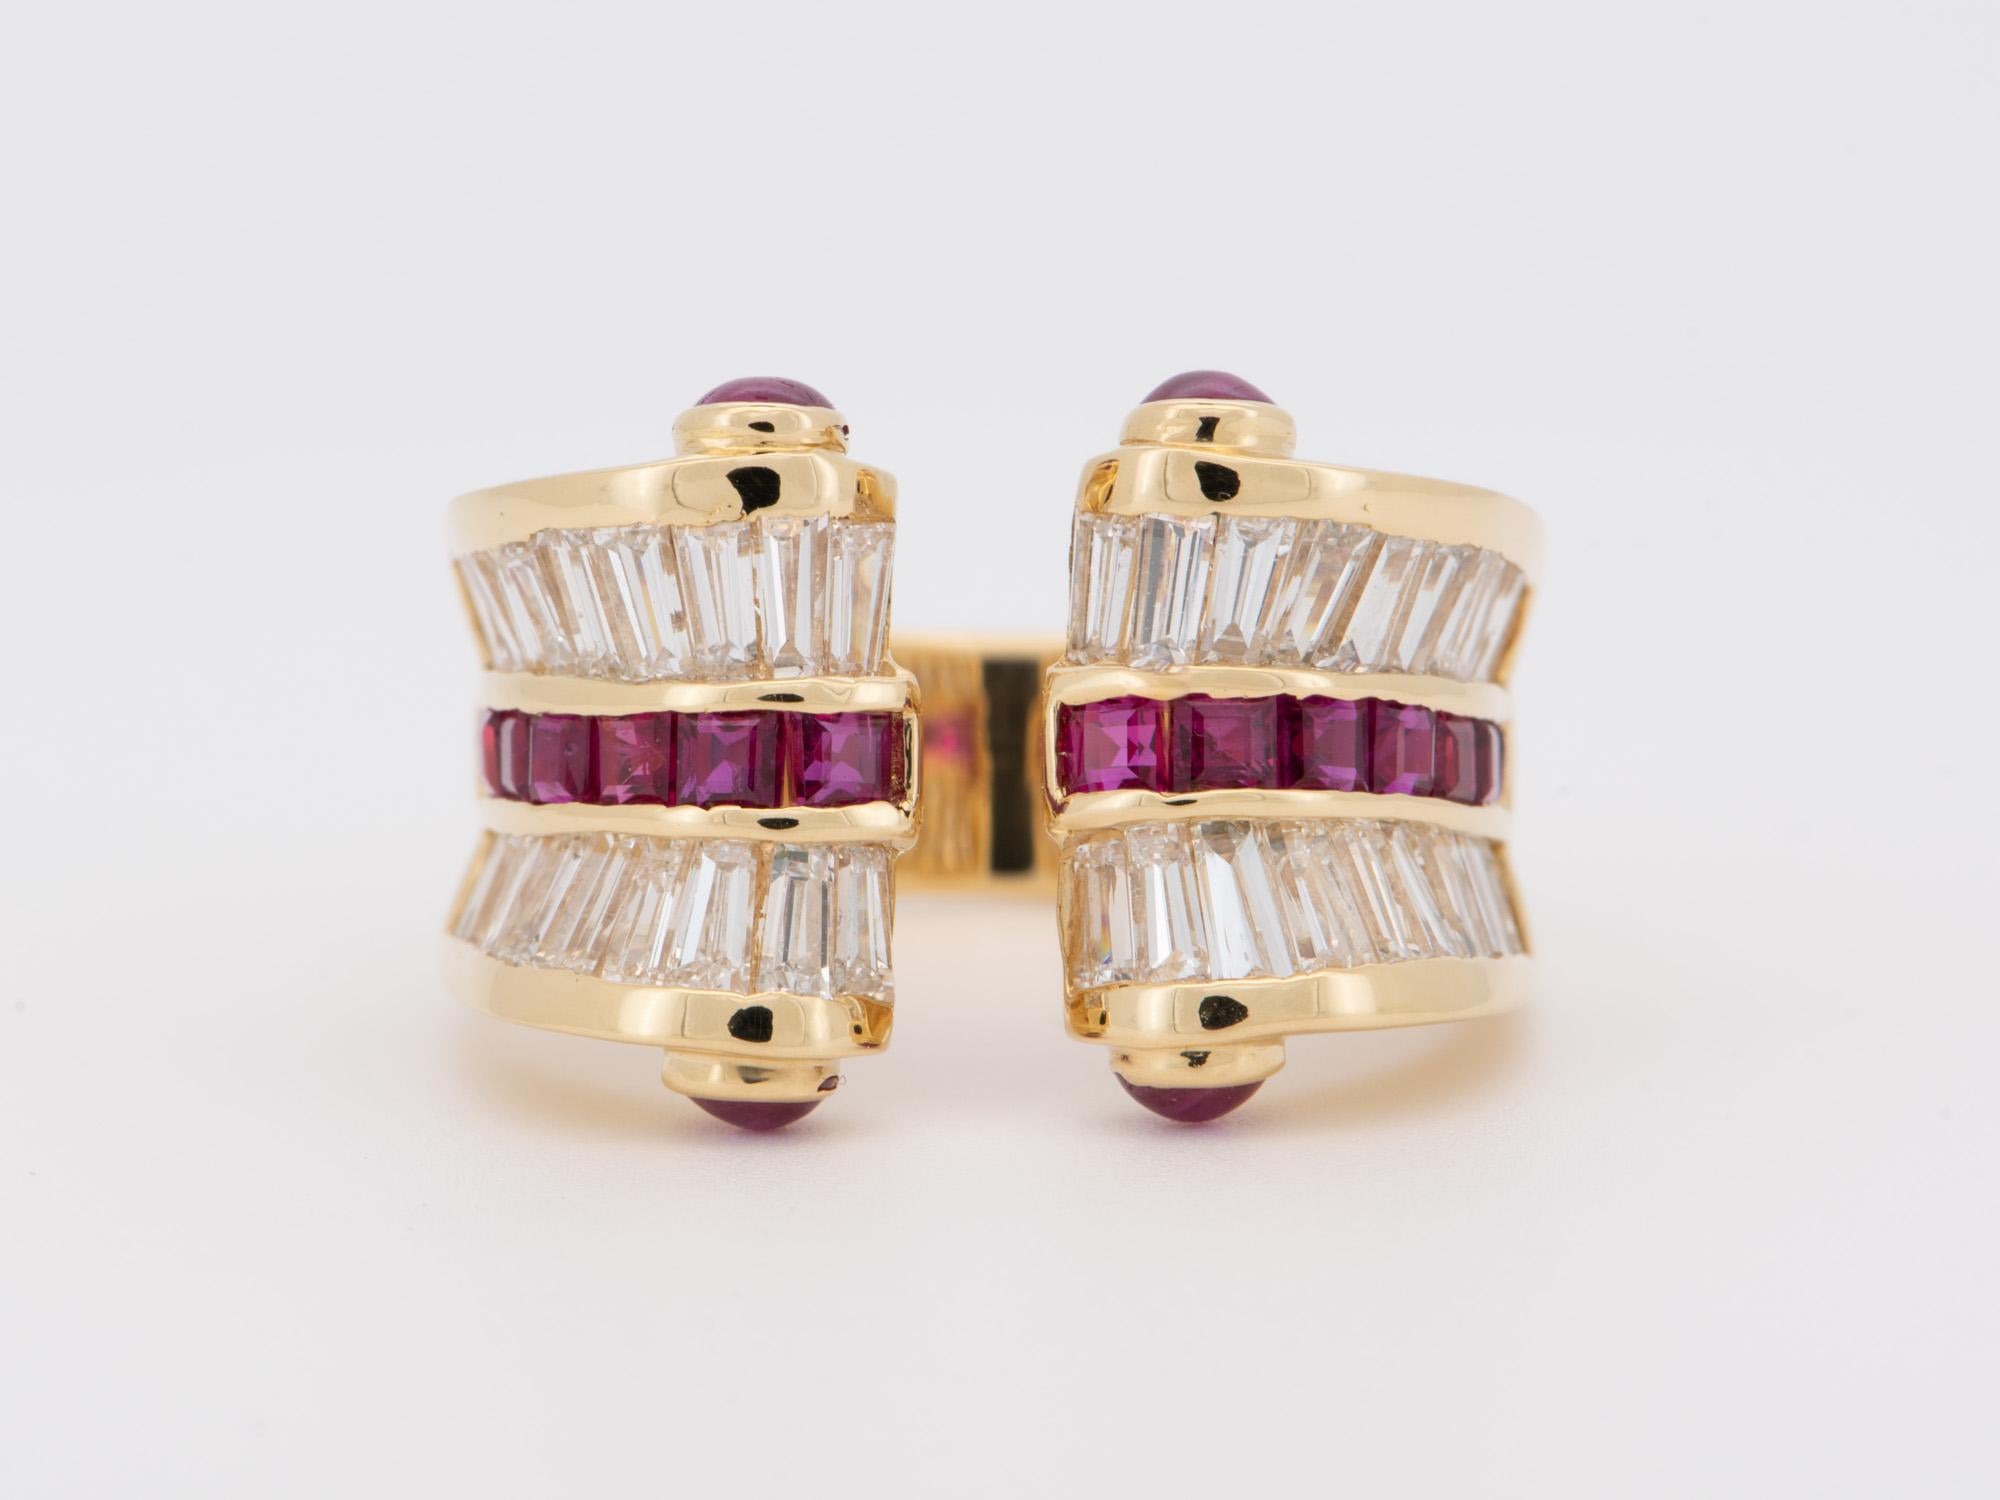 ♥ Diamond and Ruby Baguette Open End Band 18K Gold
♥ The face of the ring measures 21mm in width (East West direction), 14.3mm in length (North South direction), and sits 4.7mm tall from the finger. The band is 5.4mm wide.

♥ US size 7 (Not